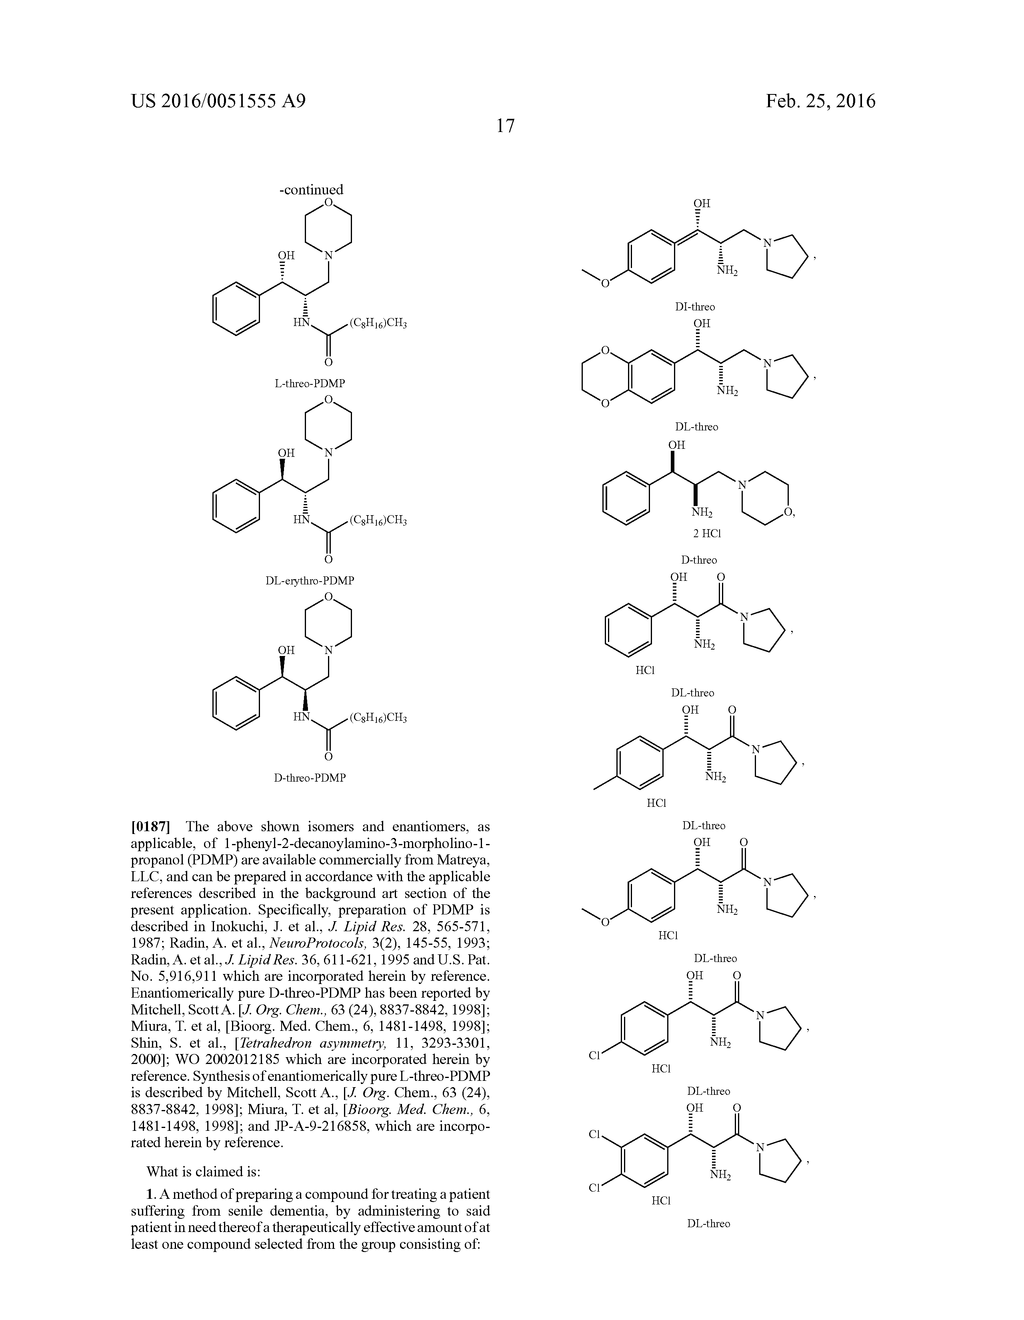 METHODS FOR TREATING COGNITIVE DISORDERS USING     1-BENZYL-1-HYDROXY-2,3-DIAMINO-PROPYL AMINES,     3-BENZYL-3-HYDROXY-2-AMINO-PROPIONIC ACID AMIDES AND RELATED COMPOUNDS - diagram, schematic, and image 19